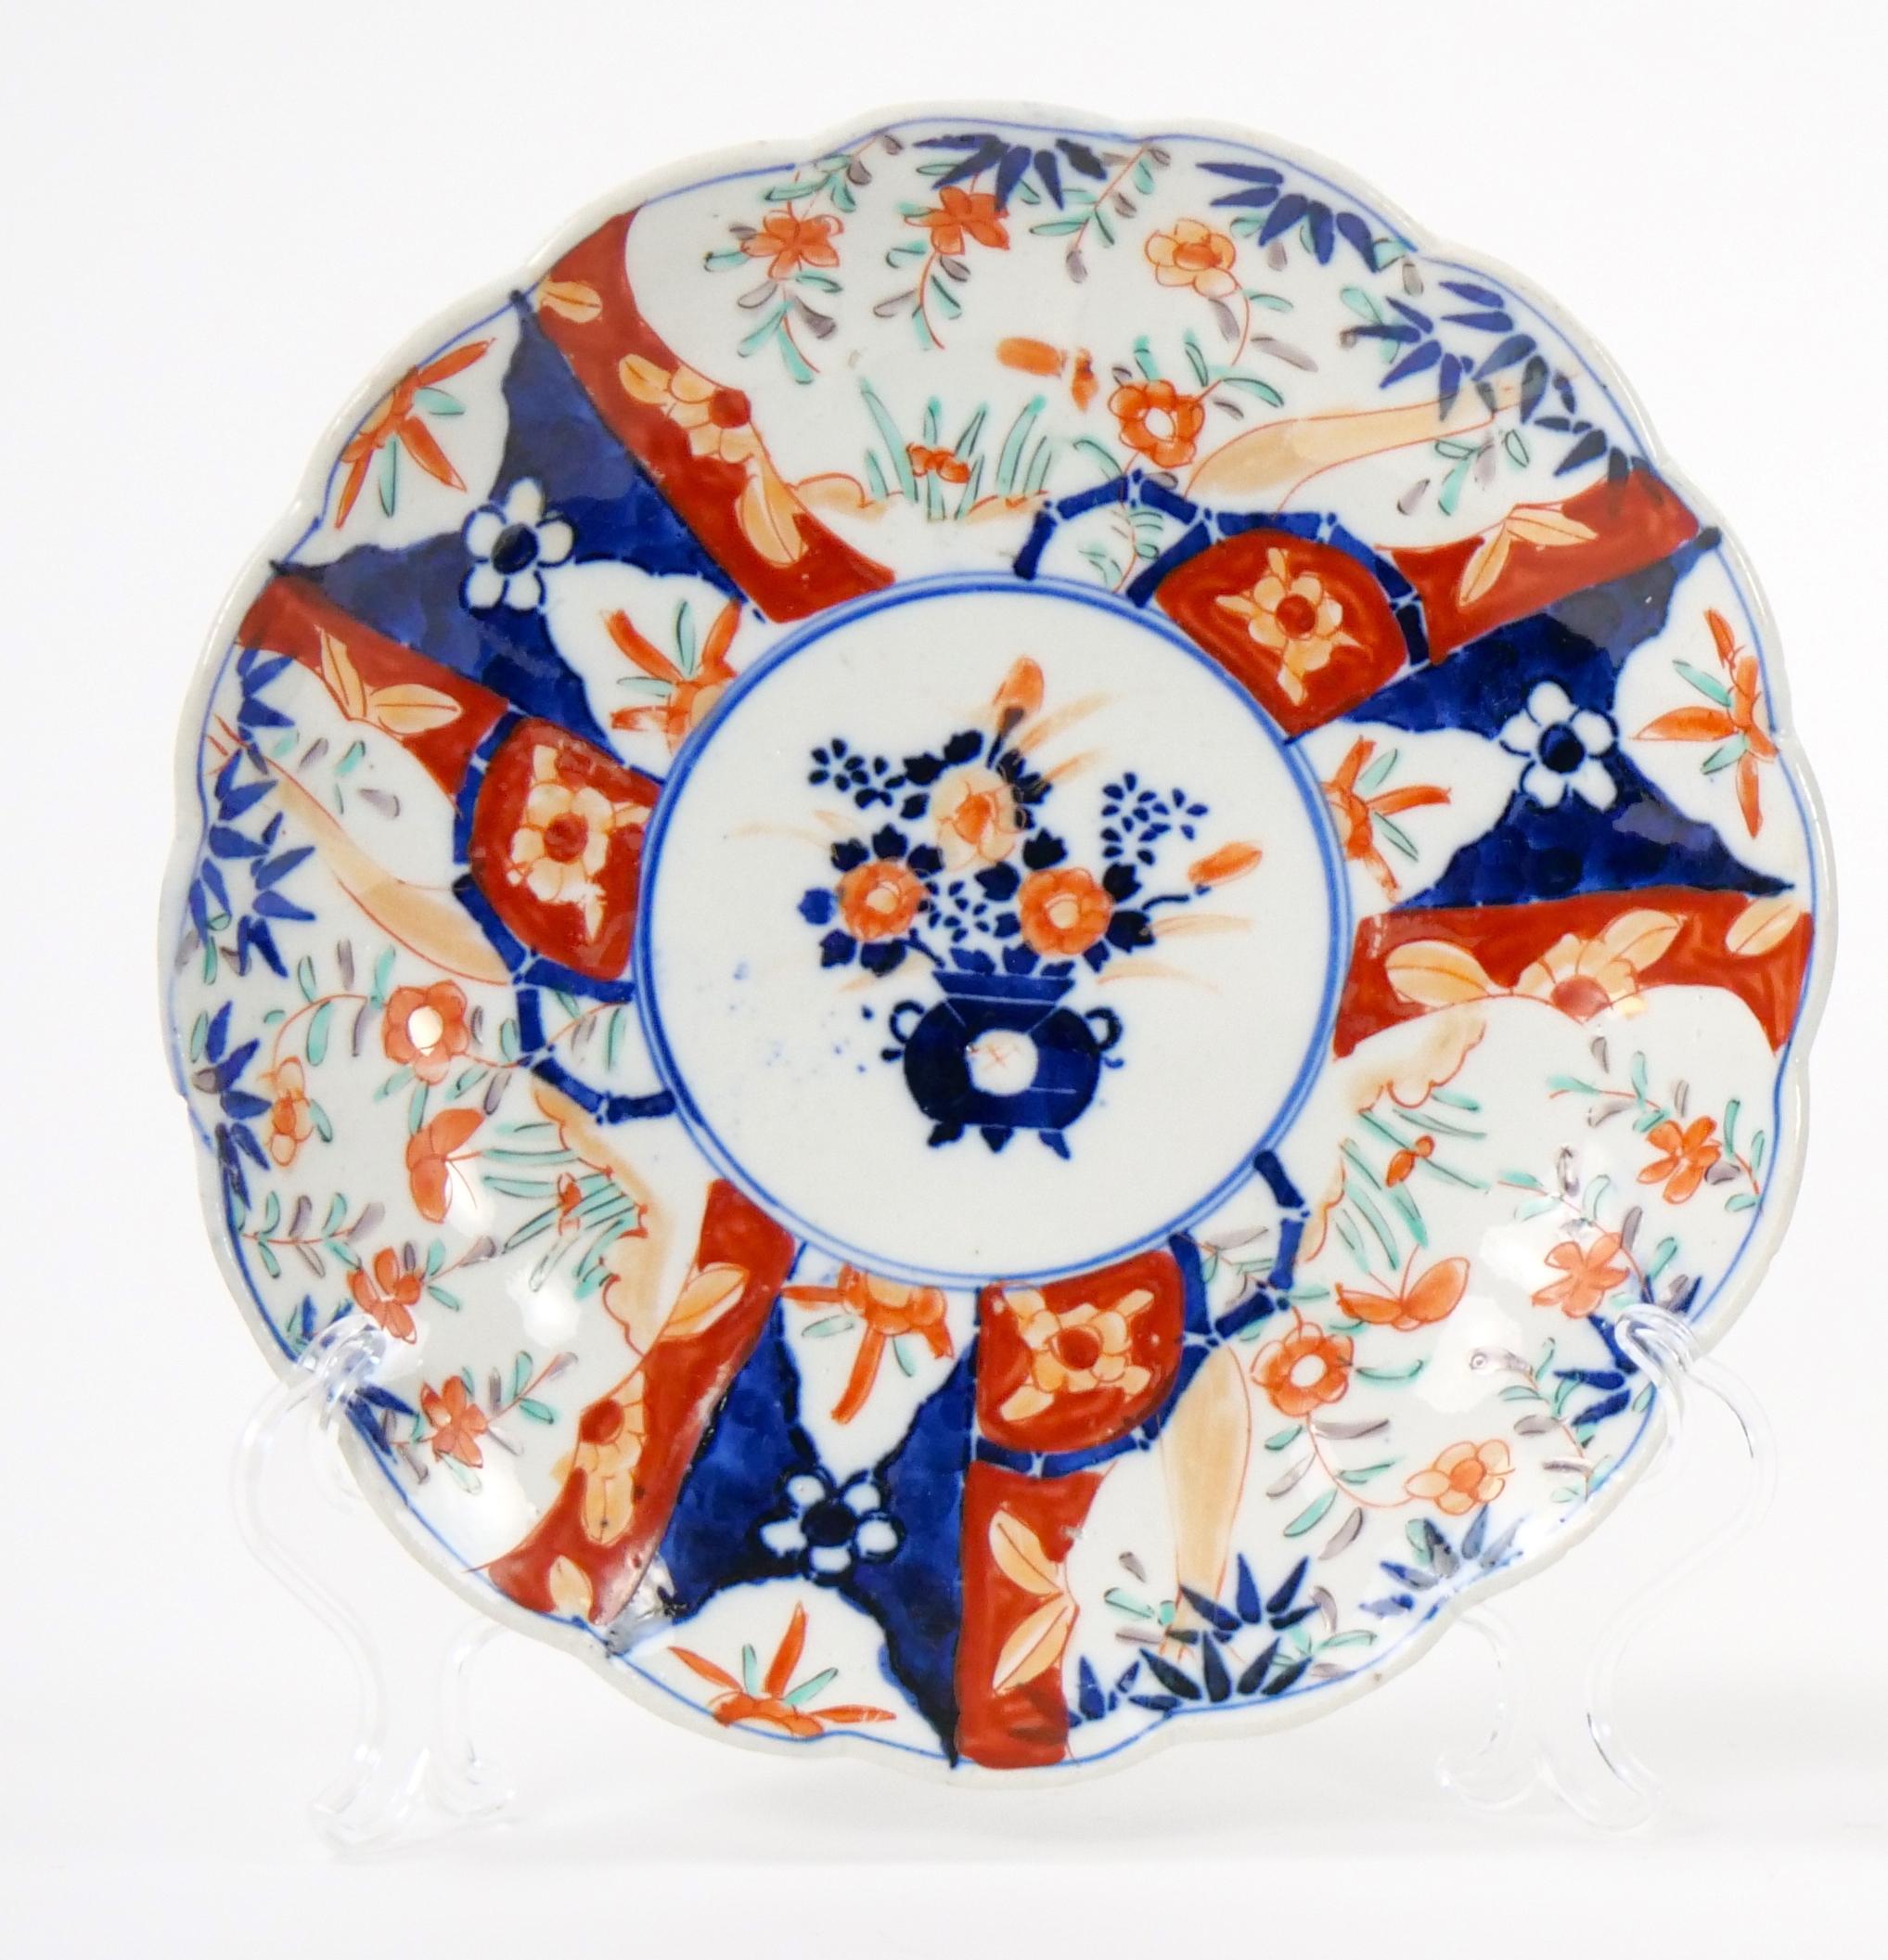 Glazed Pair Imari Porcelain Chinese Export Decorative Plate For Sale